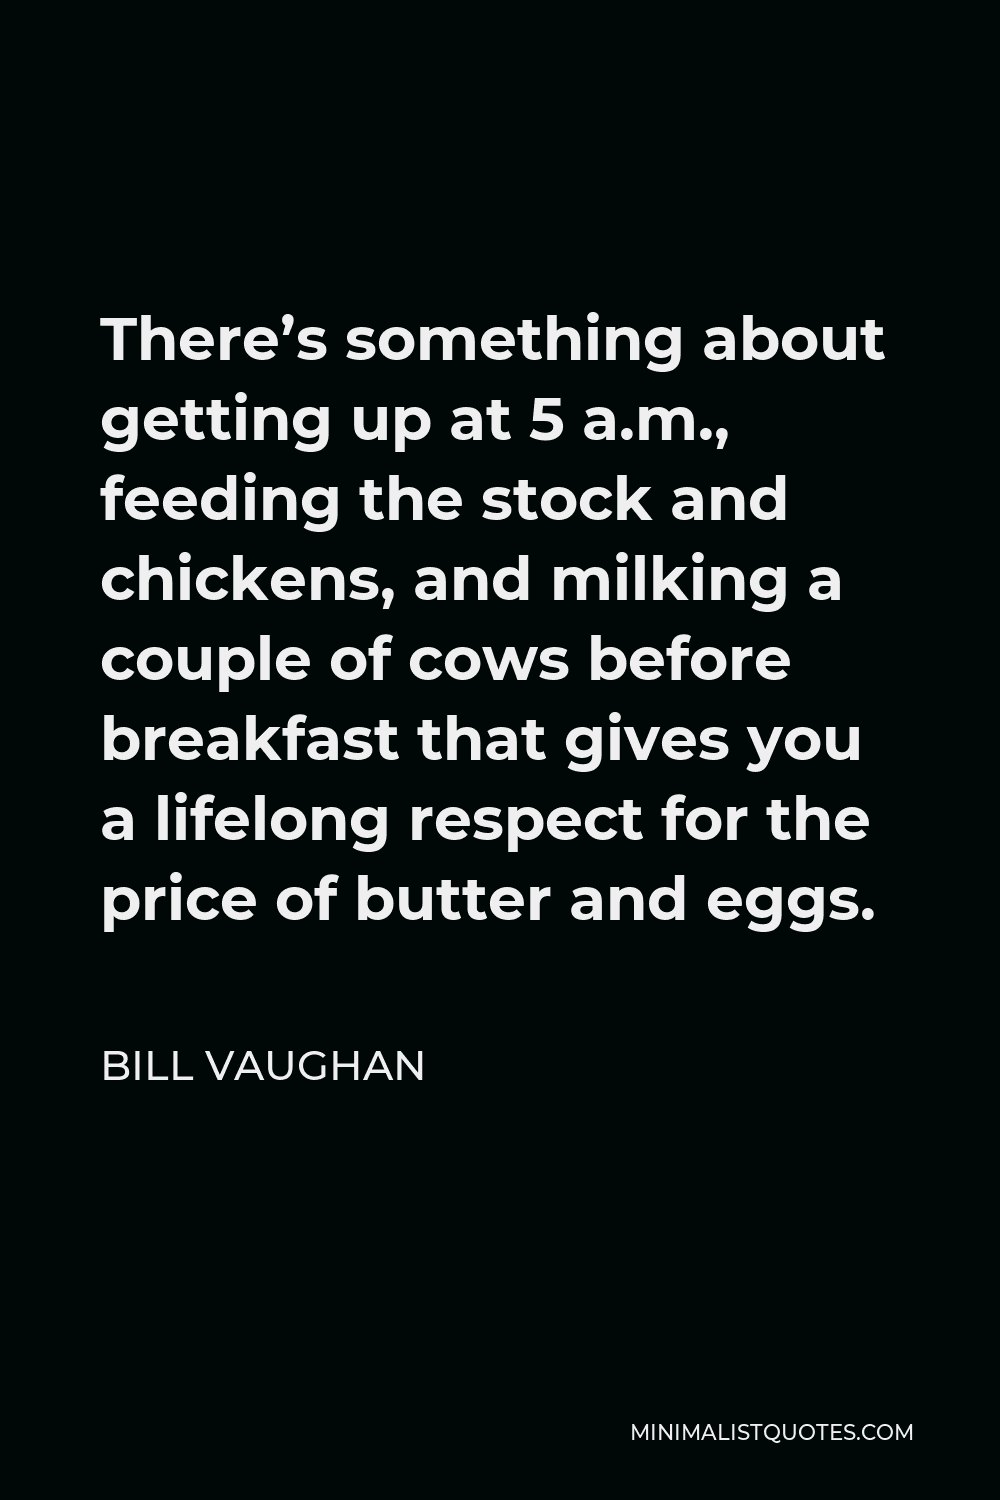 Bill Vaughan Quote - There’s something about getting up at 5 a.m., feeding the stock and chickens, and milking a couple of cows before breakfast that gives you a lifelong respect for the price of butter and eggs.